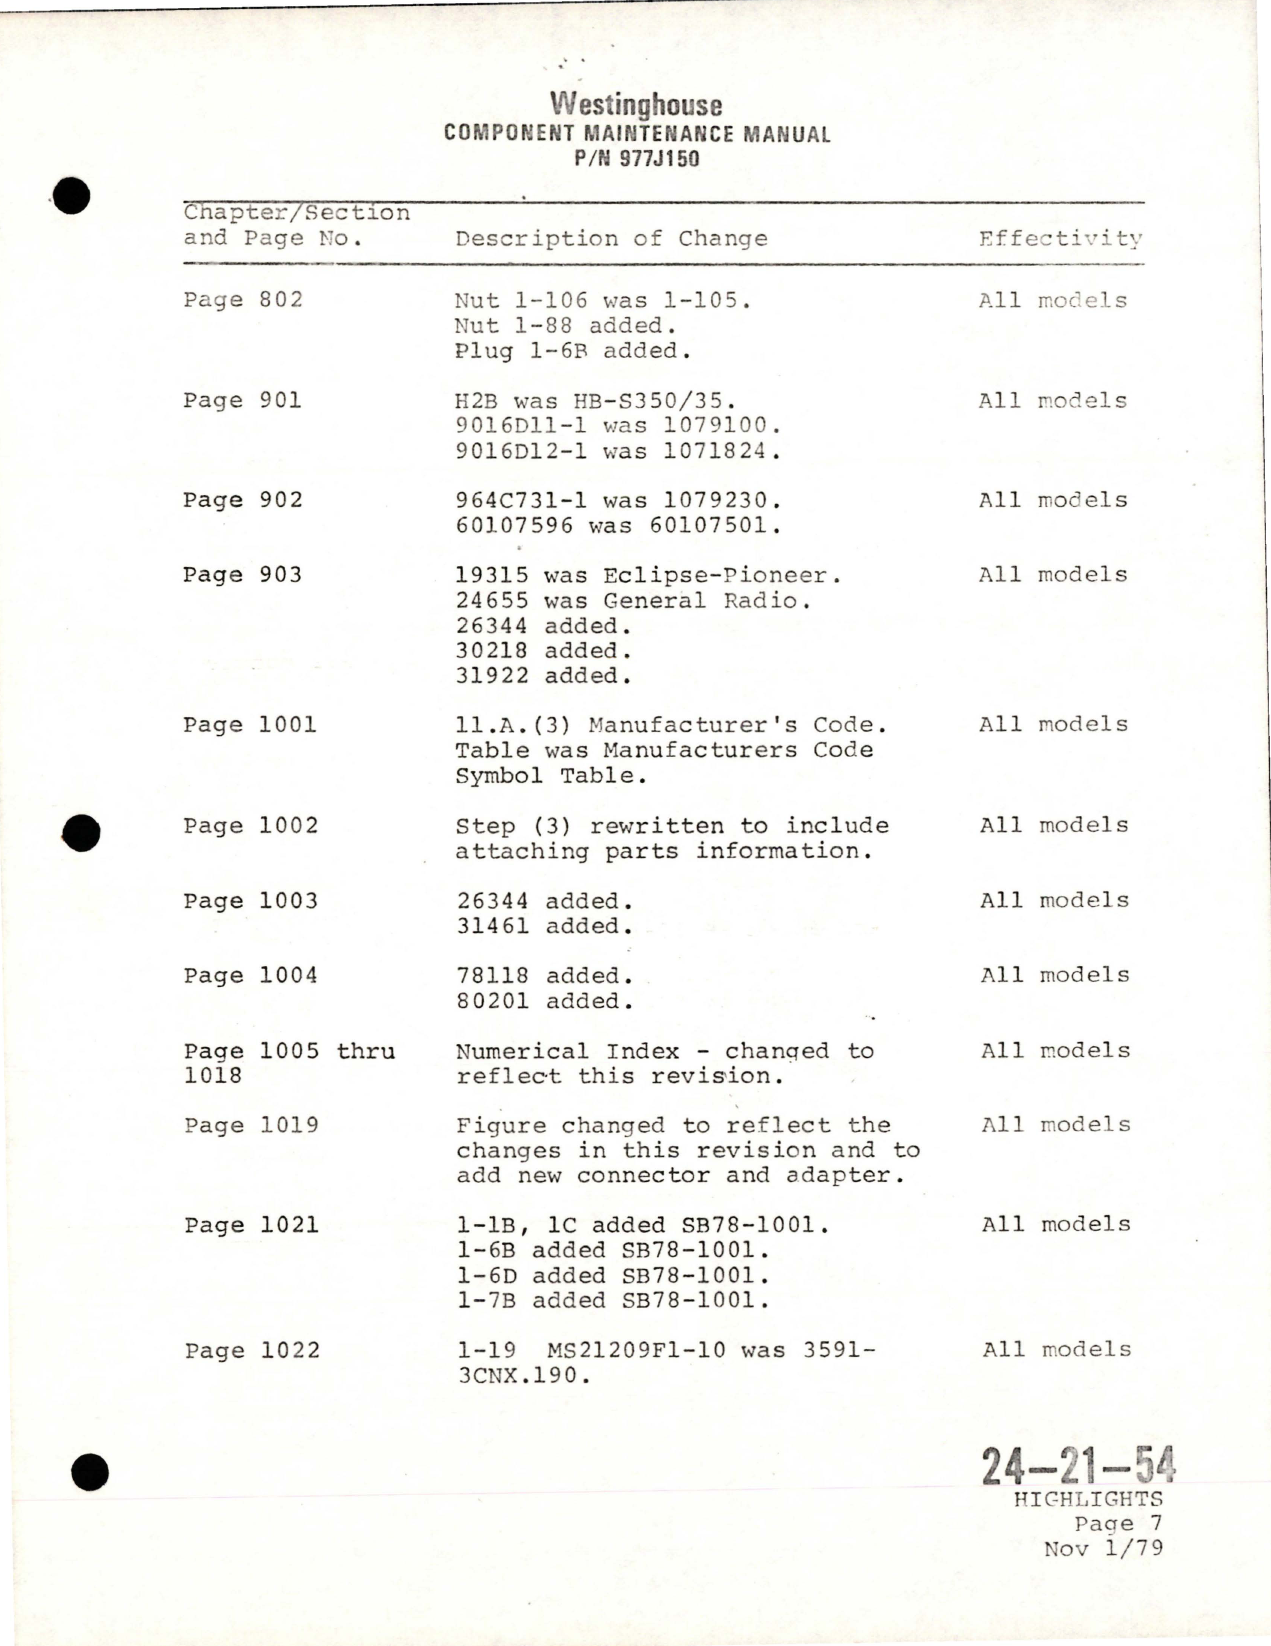 Sample page 9 from AirCorps Library document: Maintenance Manual with Illustrated Parts List for AC Generator - Parts 977J150-1, 977J150-2, 977J150-3, and 977J150-4 